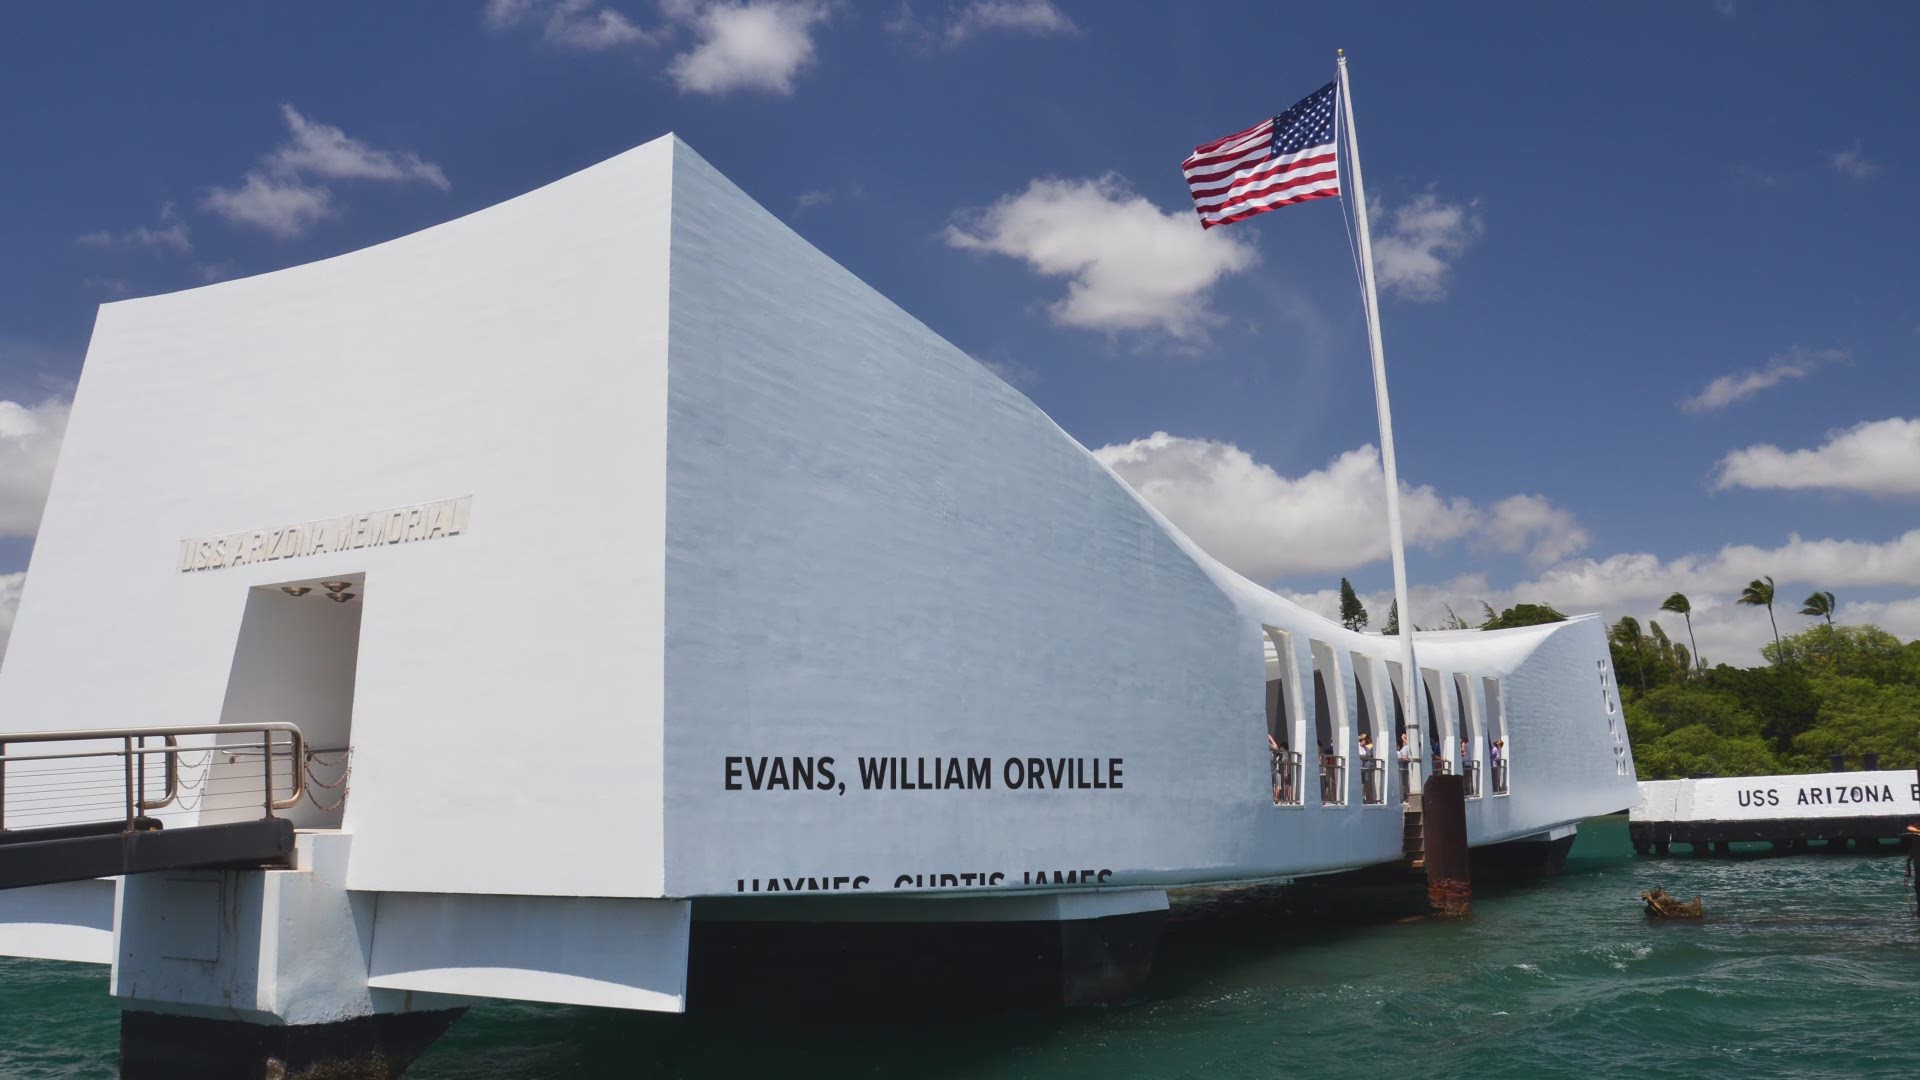 Twelve Idahoans aboard the USS Arizona were killed on December 7, 1941, in the attack that propelled the United States into World War II.